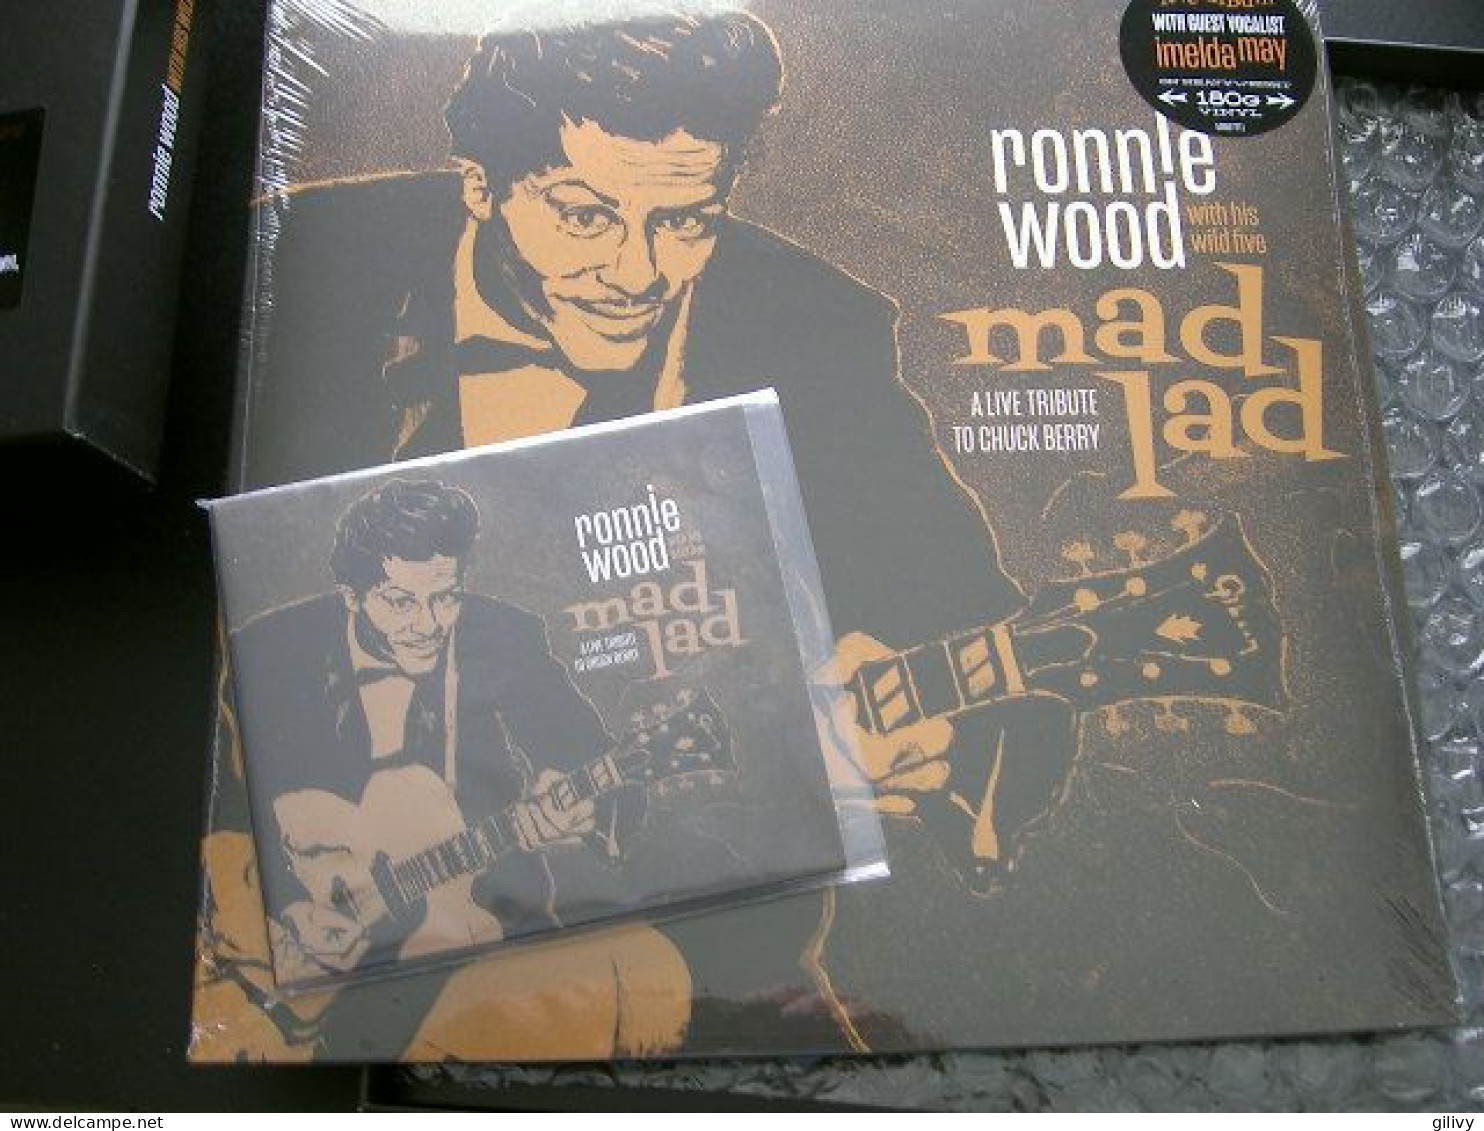 Coffret Vinyle / Cd -  RONNIE WOOD : " Mad Lad "  - Deluxe Edition - Formati Speciali